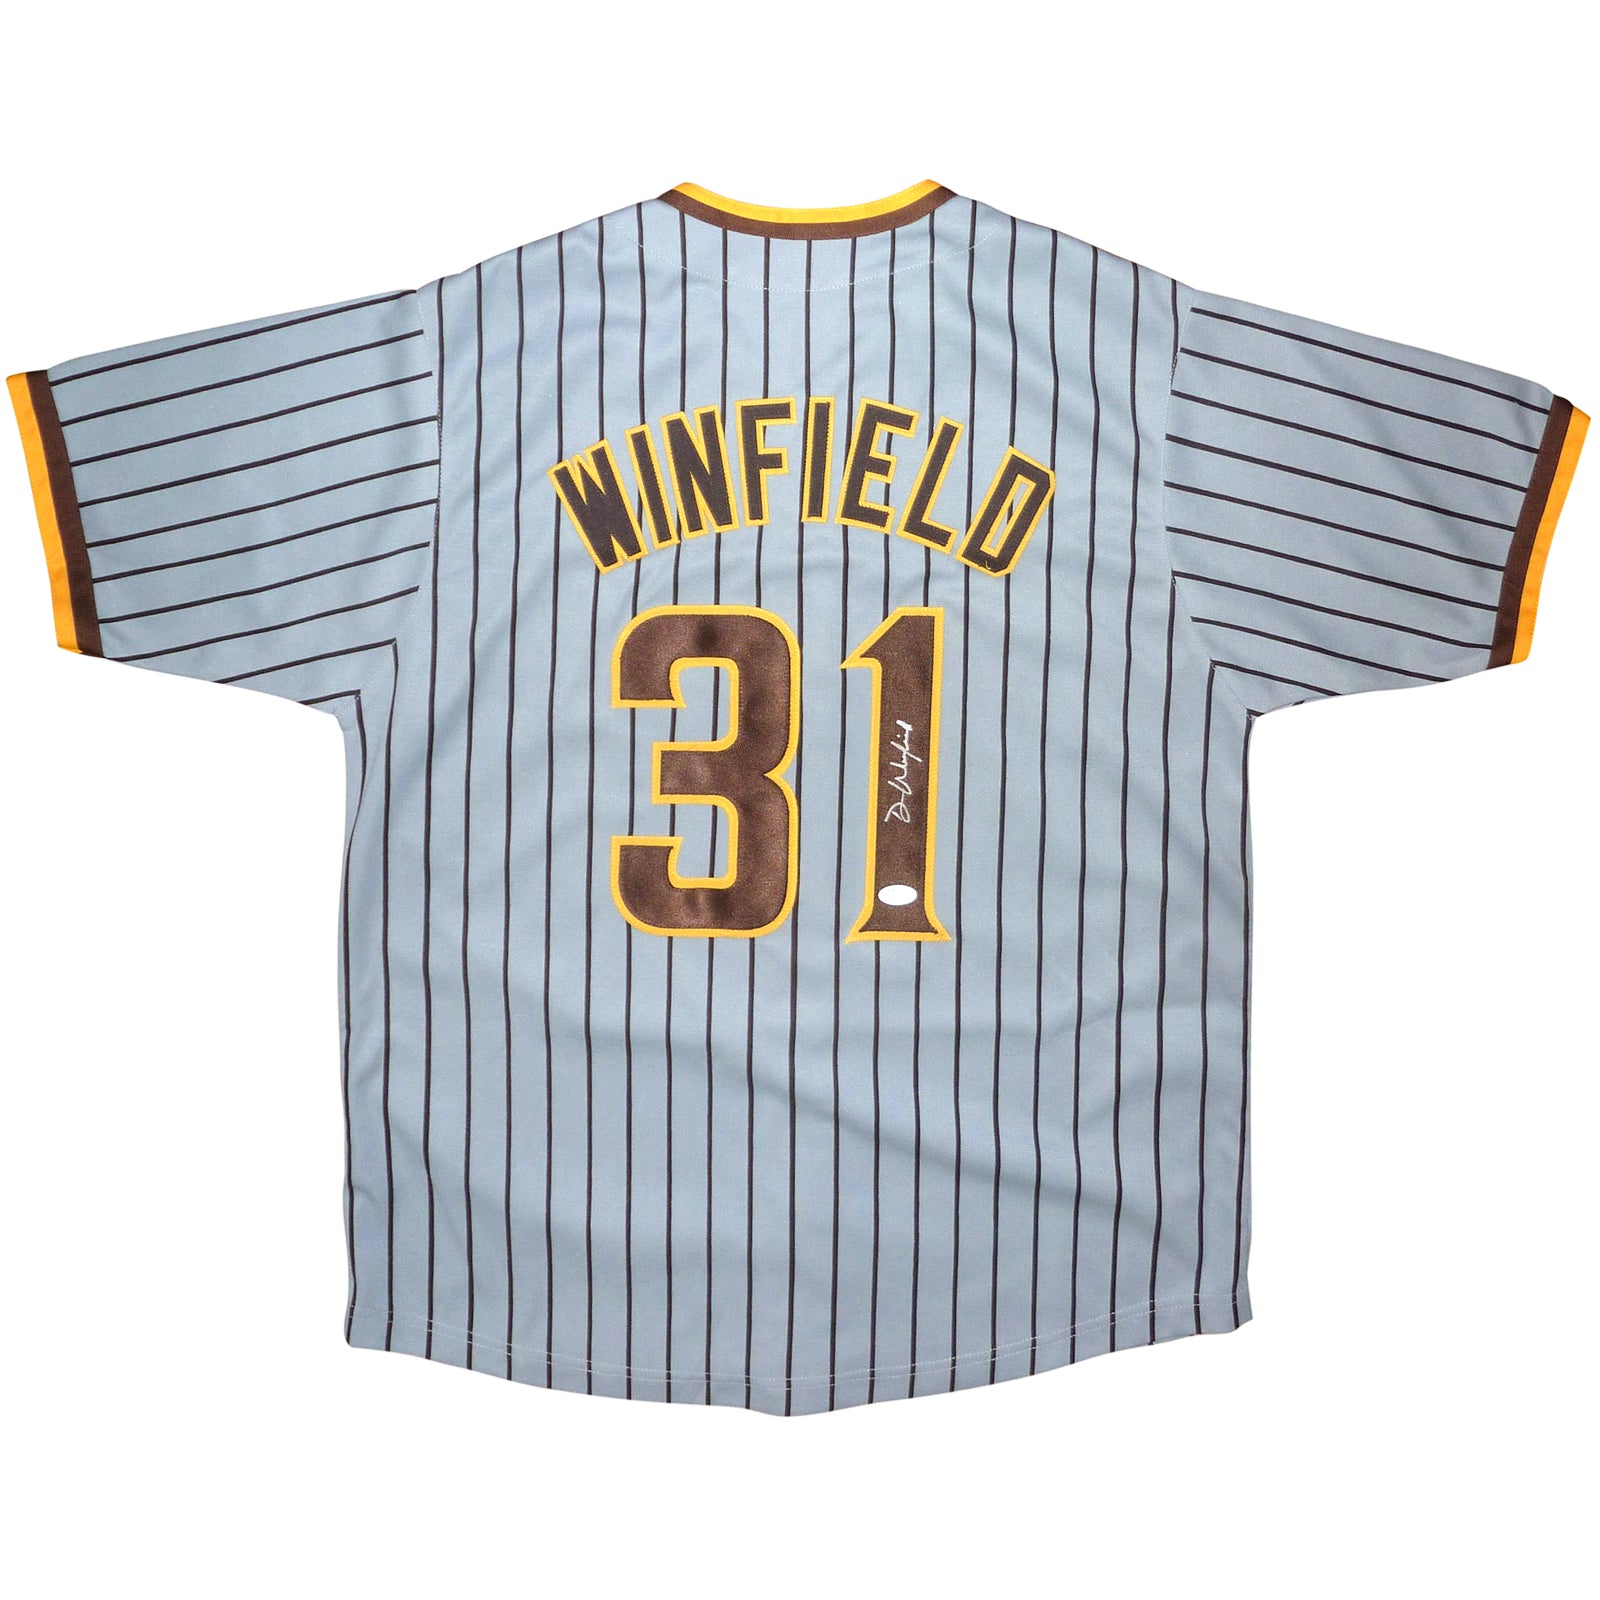 Baseball - Dave Winfield - Images